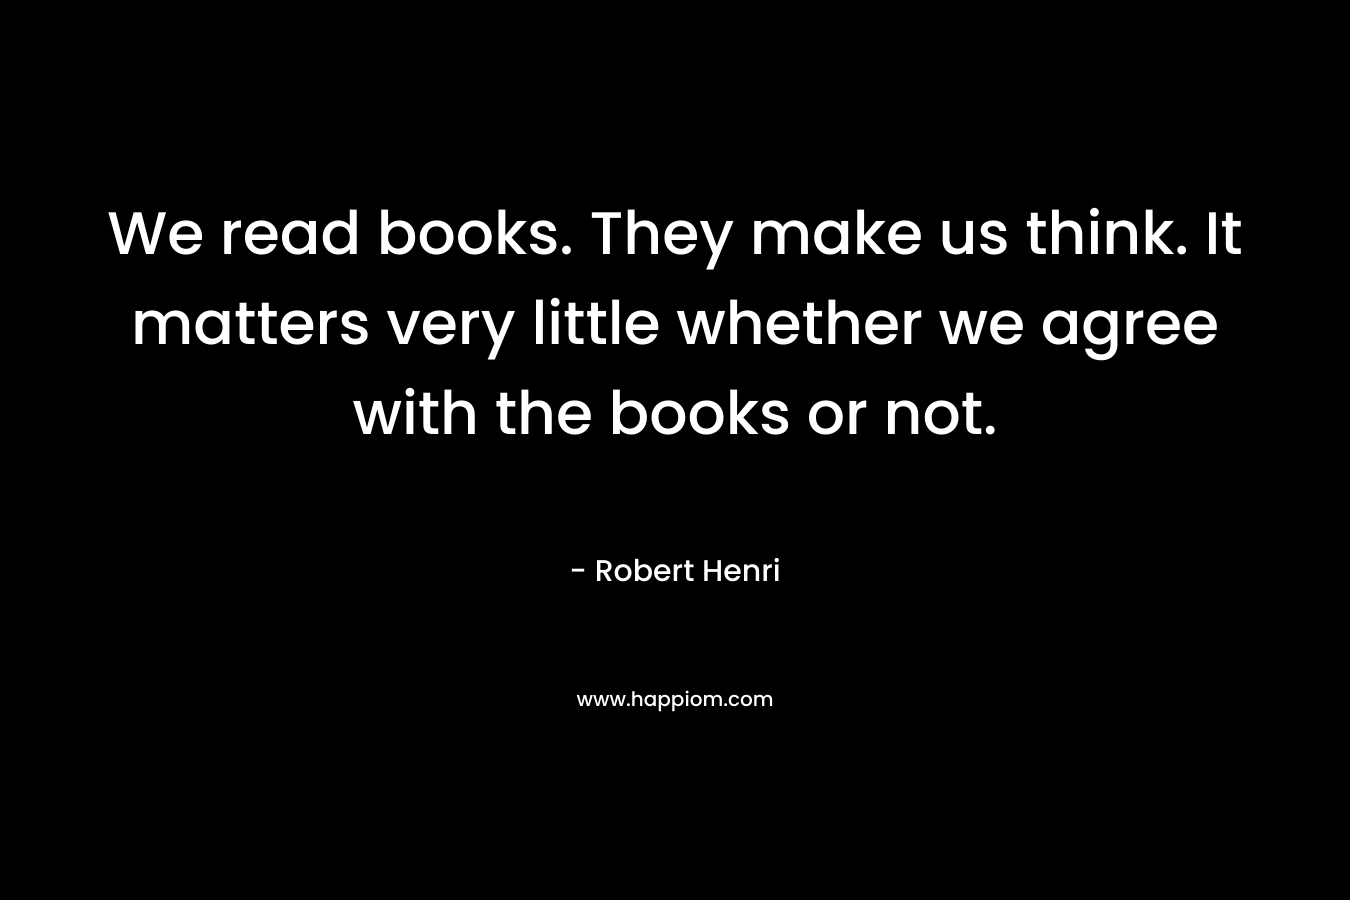 We read books. They make us think. It matters very little whether we agree with the books or not.